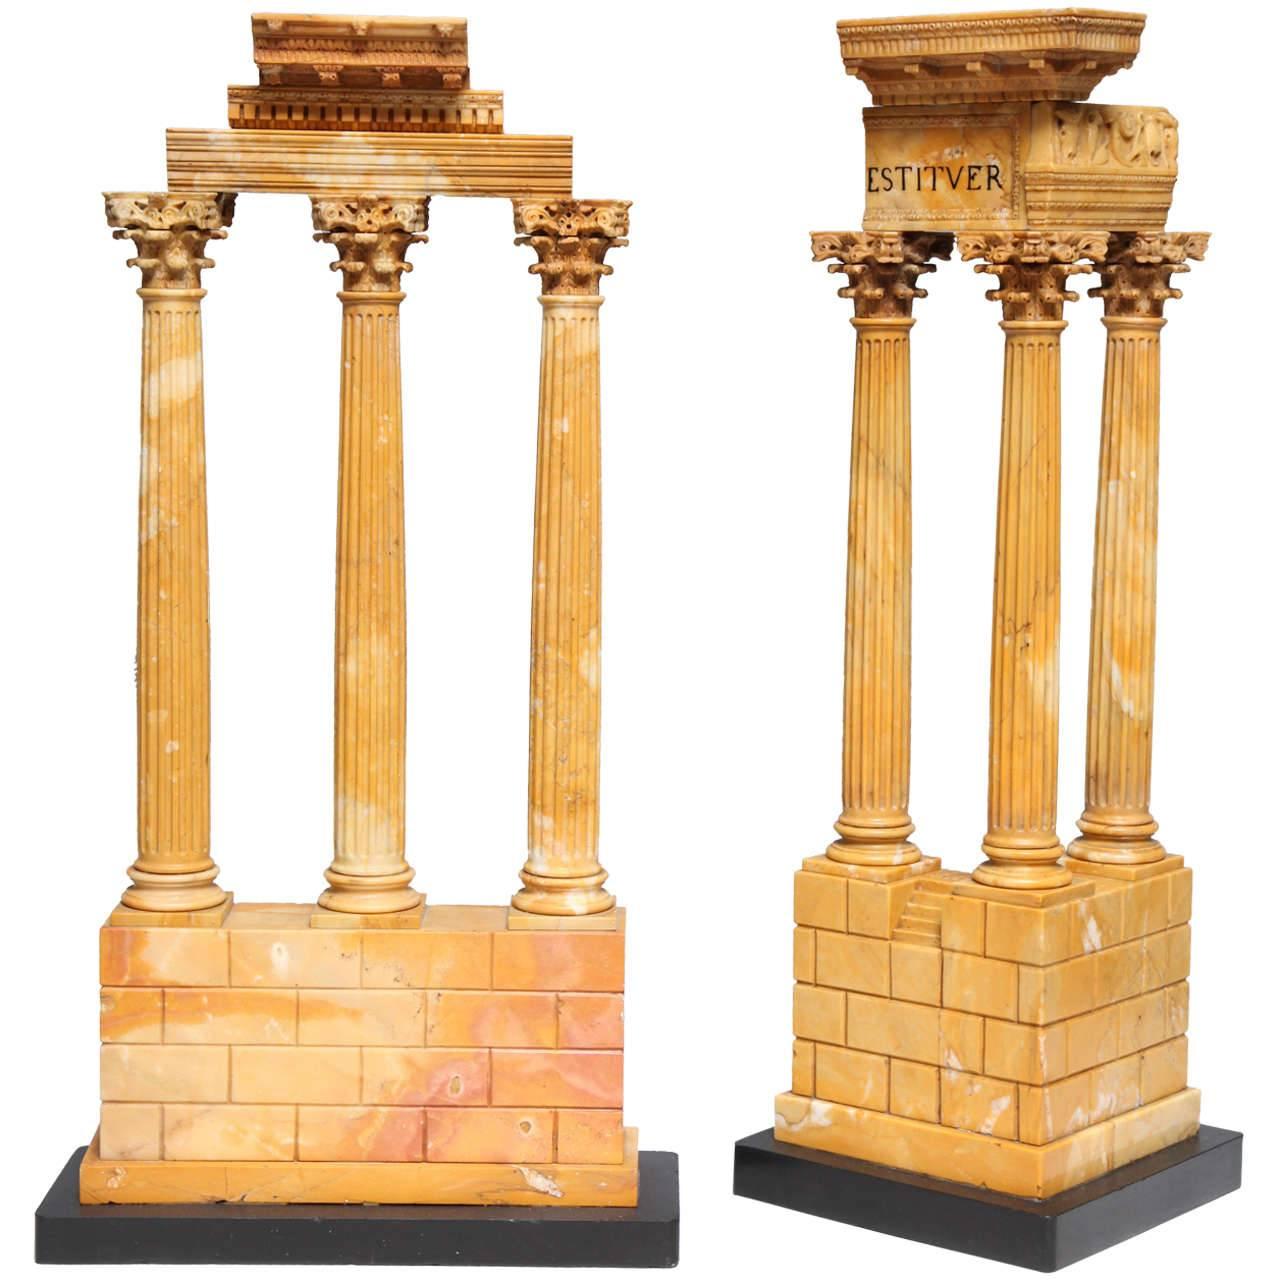 Pair of Antique Italian Grand Tour Models of Ruins in Sienna Marble